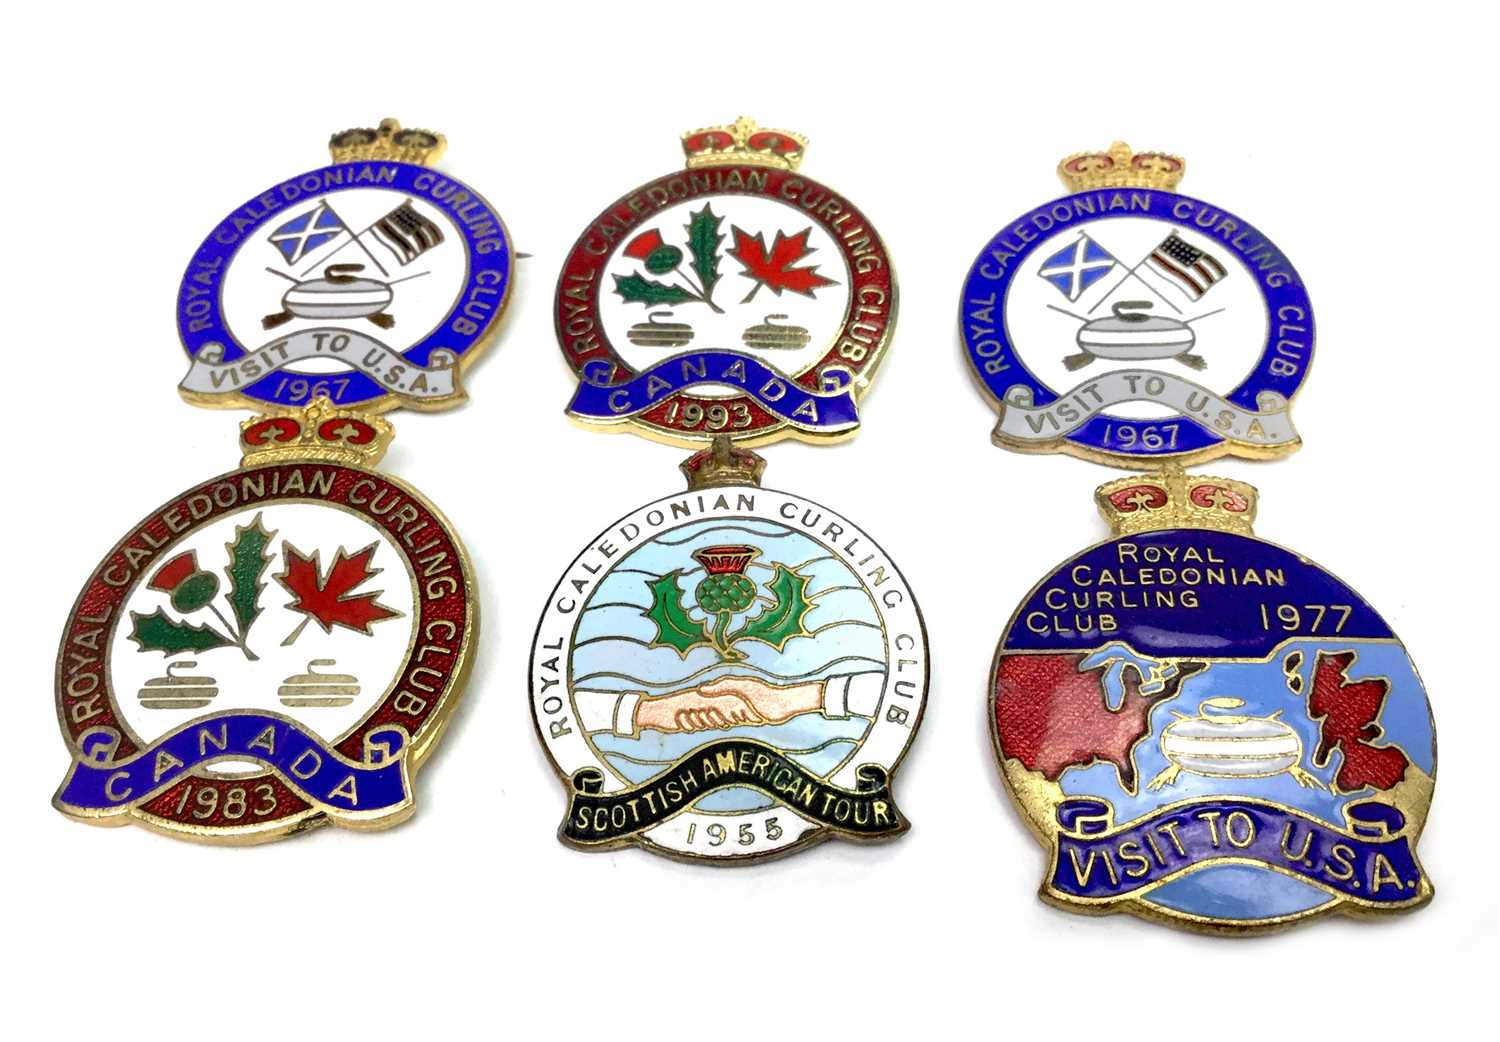 Lot 1848 - A COLLECTION OF ROYAL CALEDONIAN CURLING CLUB BADGES AND ANNUALS